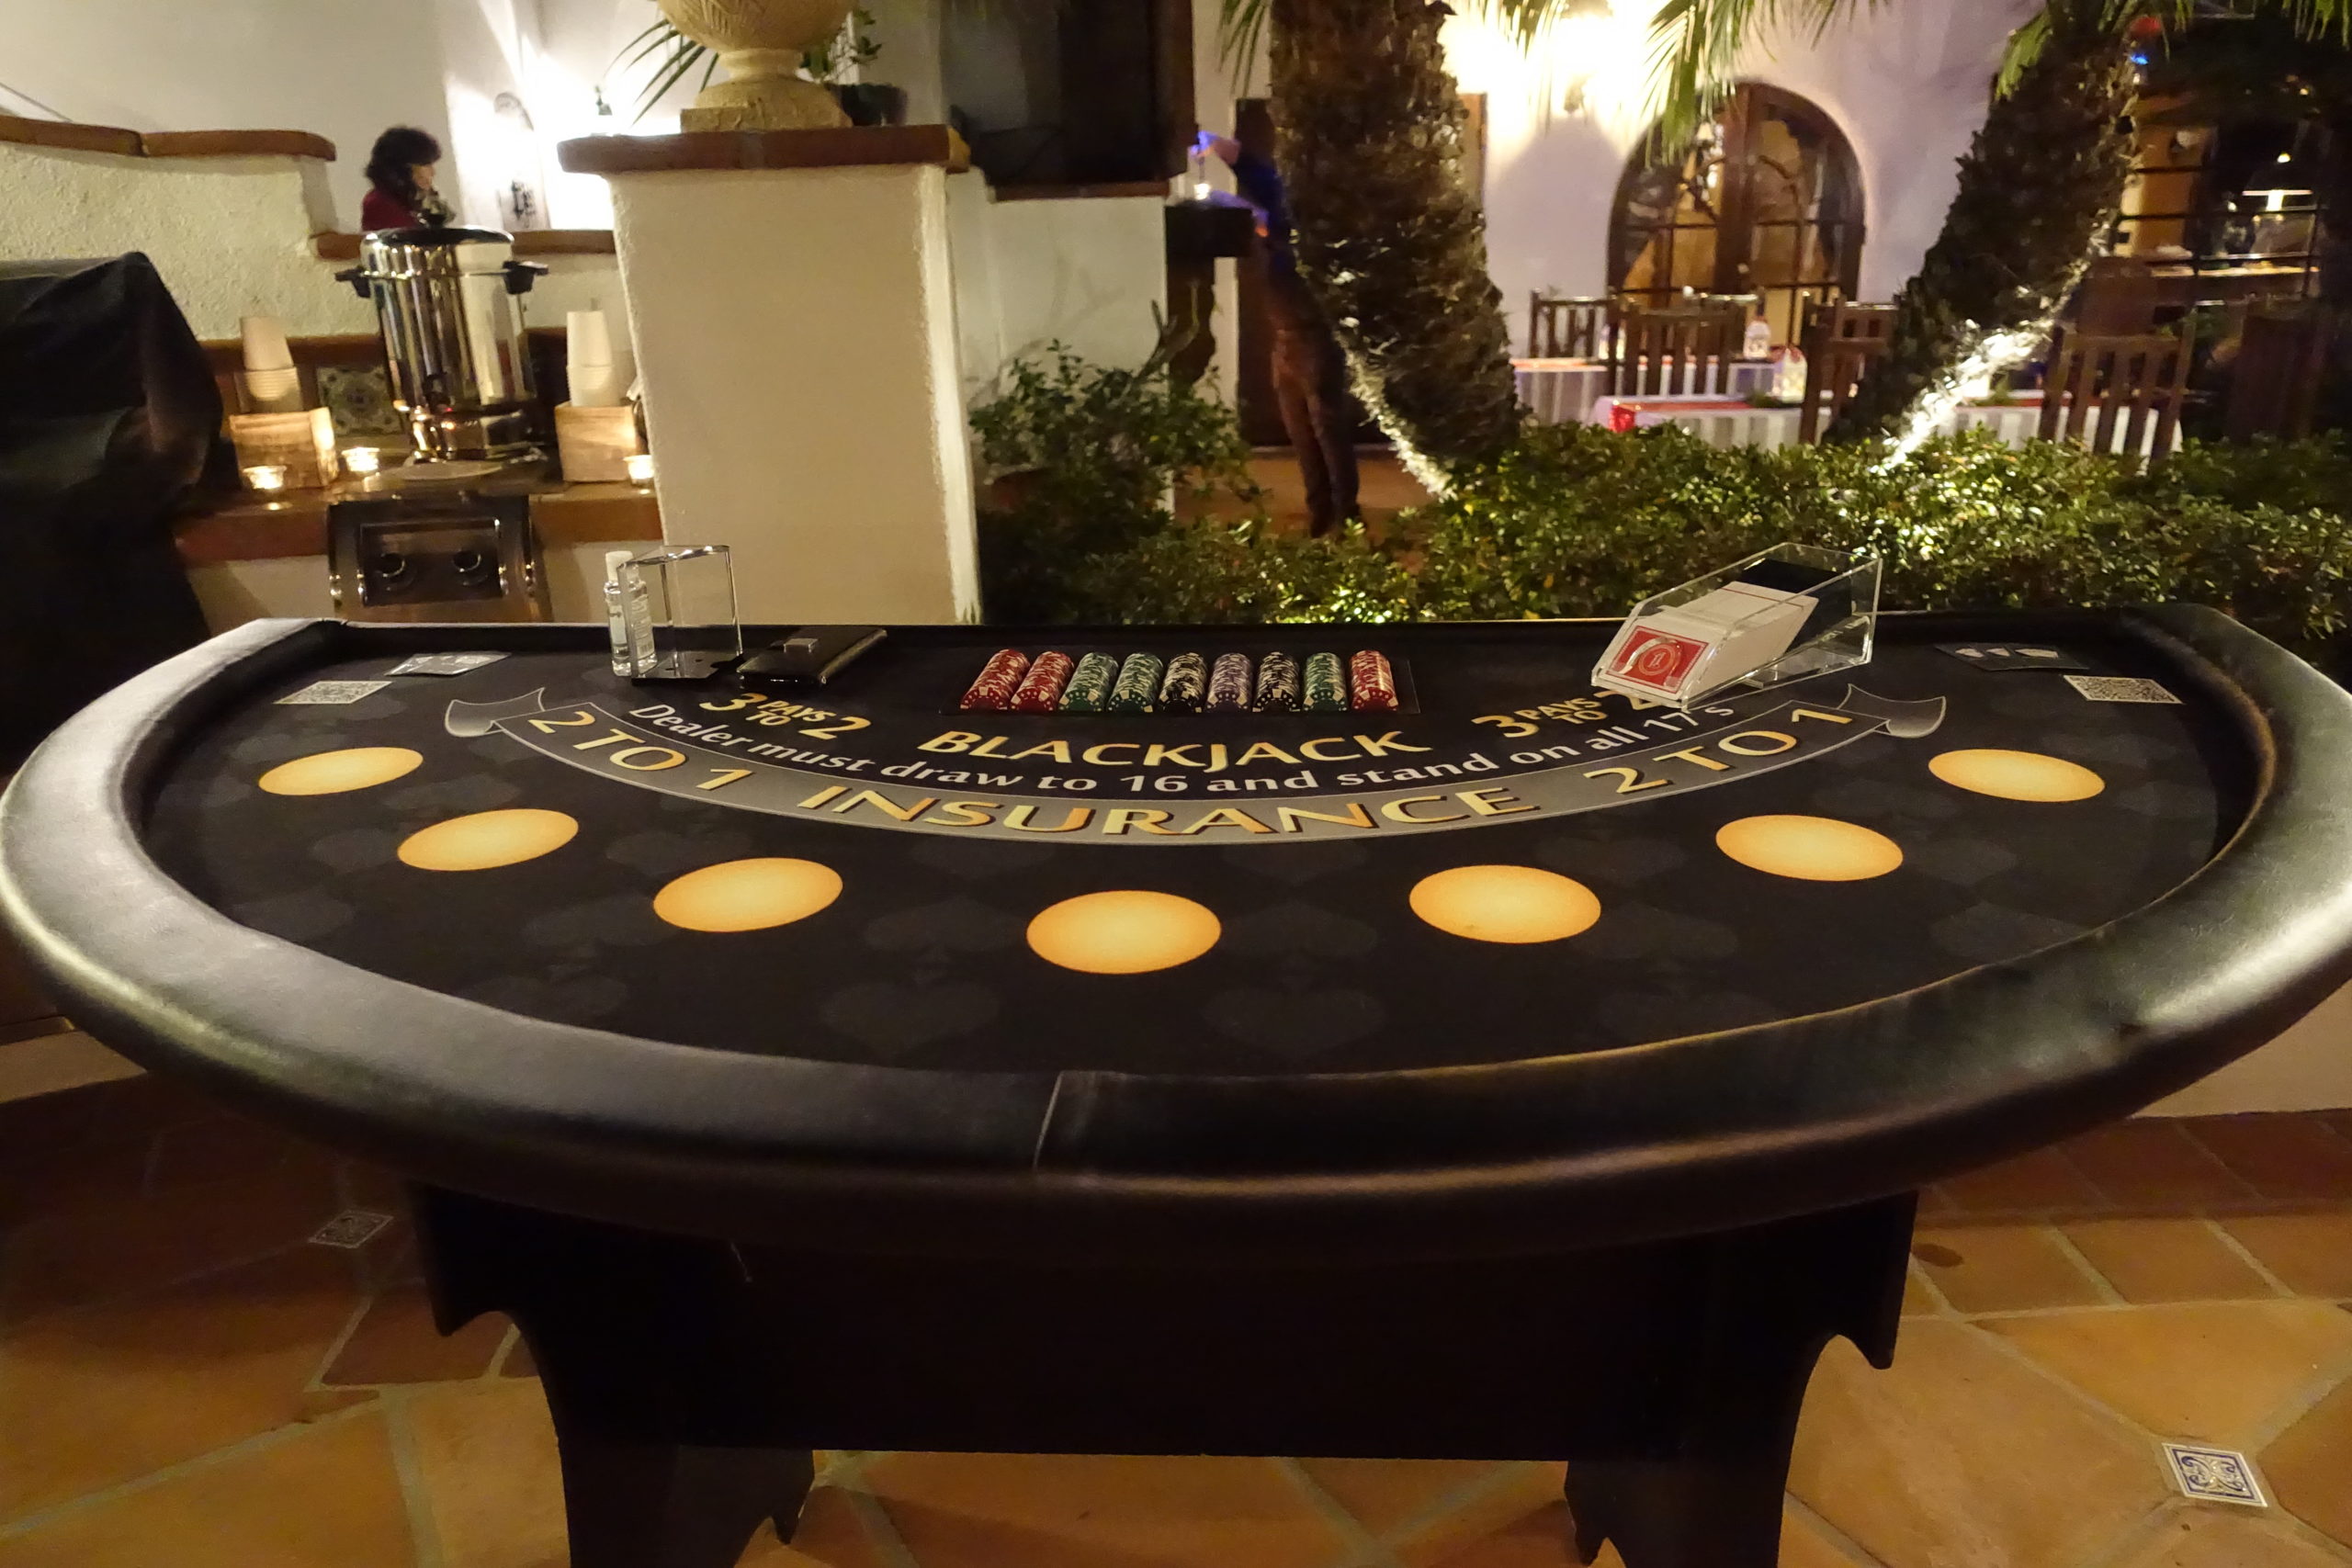 A Blackjack Table At A Casino-themed Event